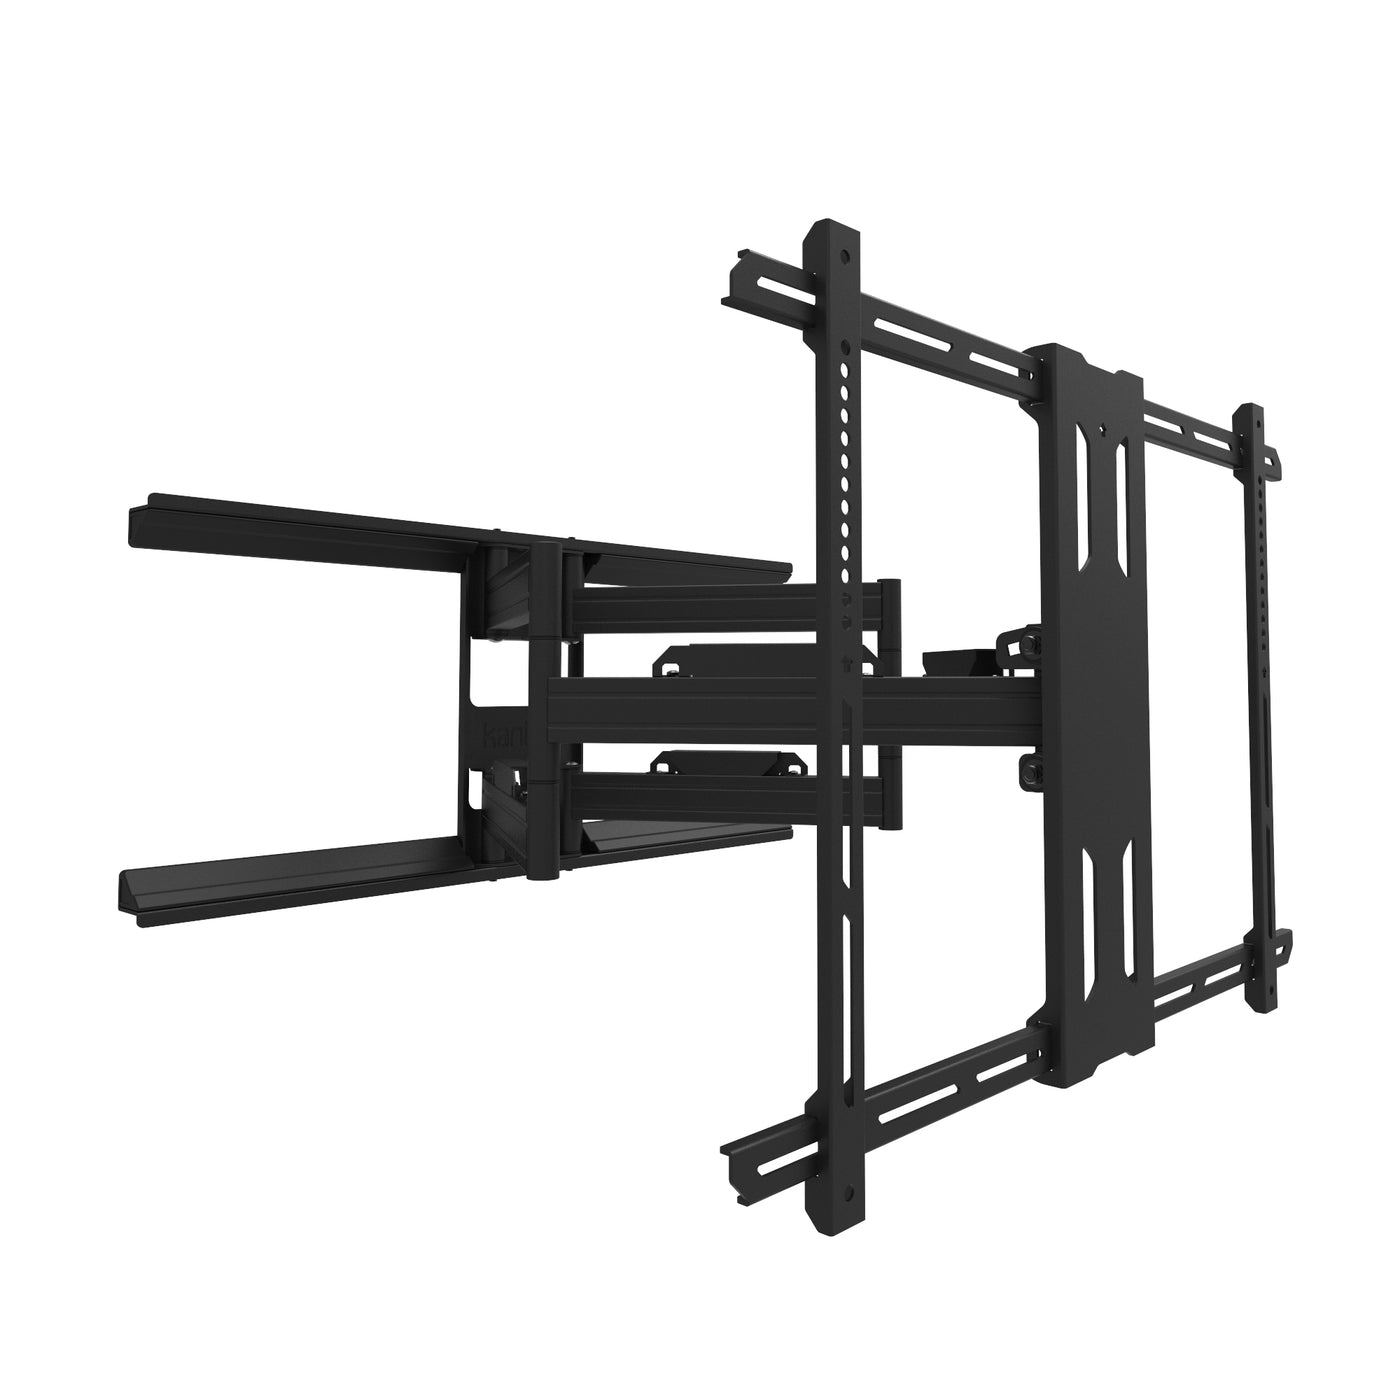 Full Motion TV Wall Mount with 31" of Extension for 42" to 100" TVs - PDX700